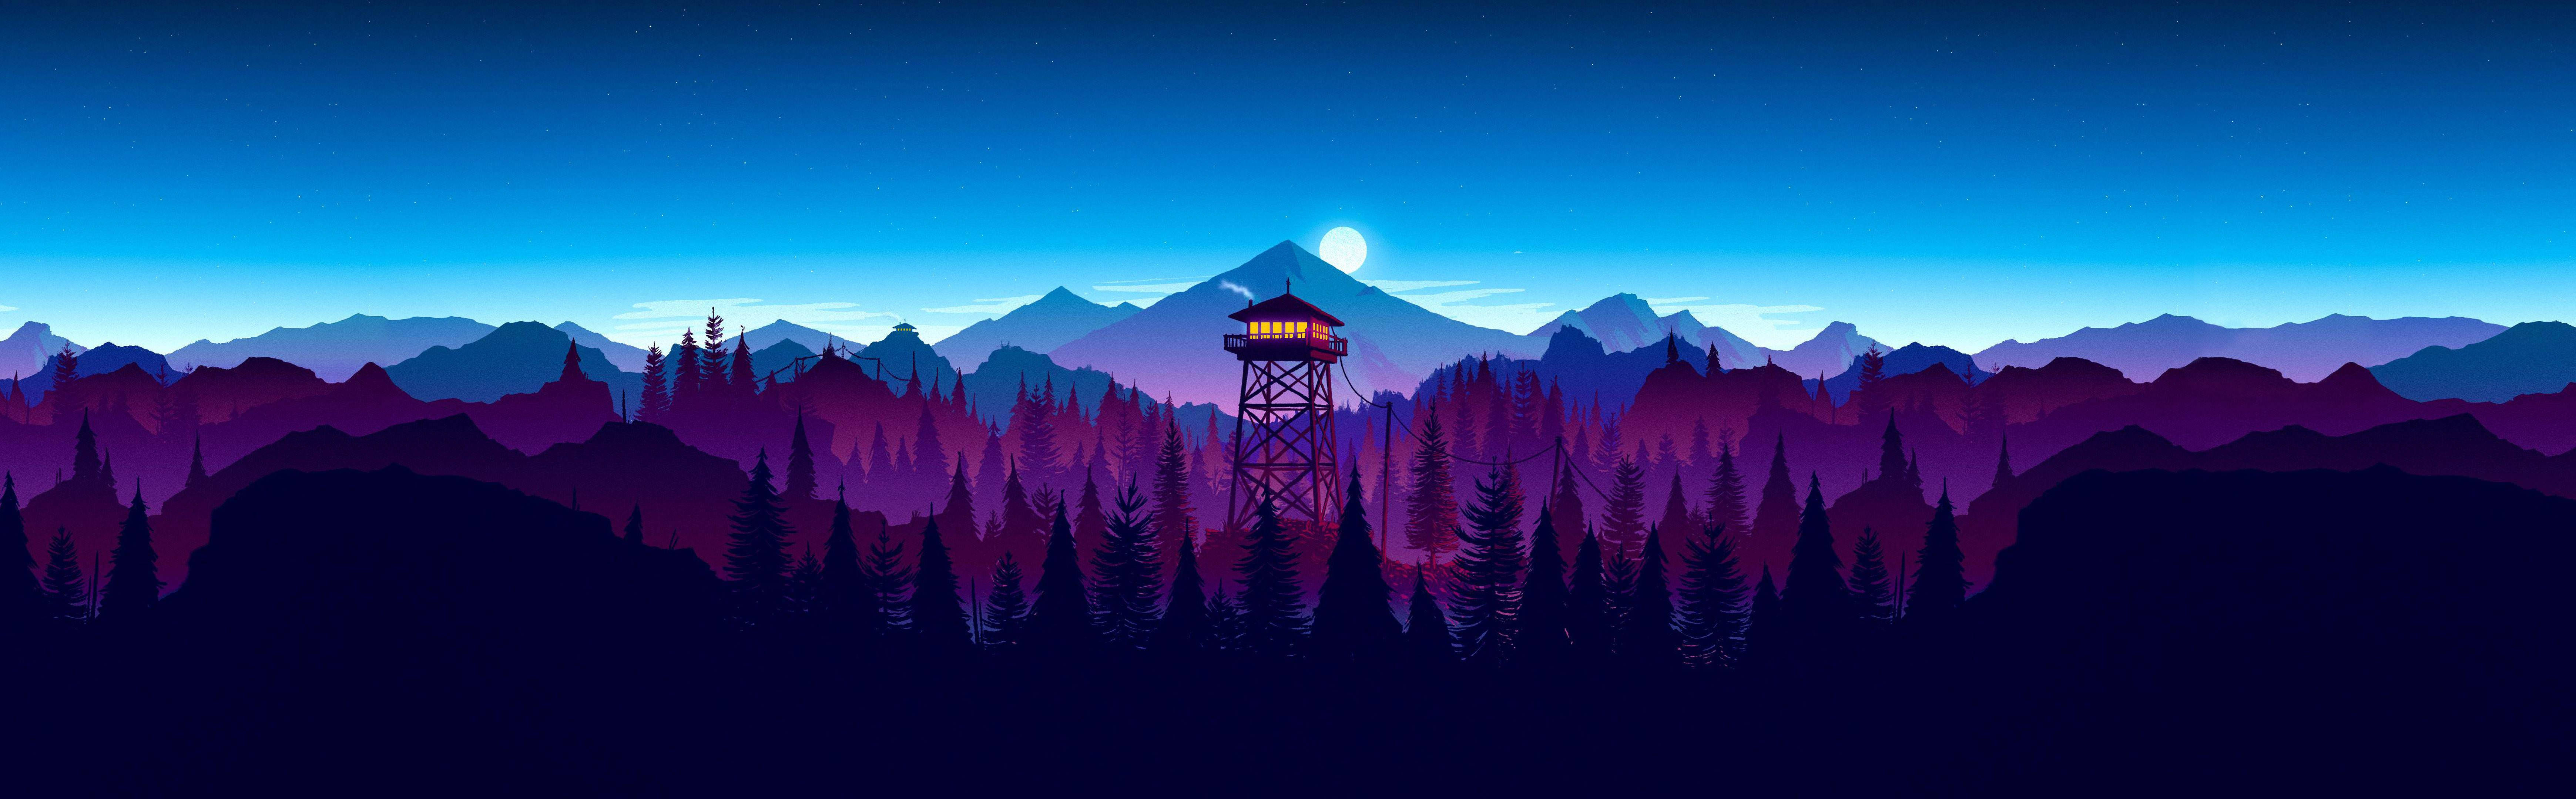 Download 4k Dual Monitor Watchtower In Forest Wallpaper 